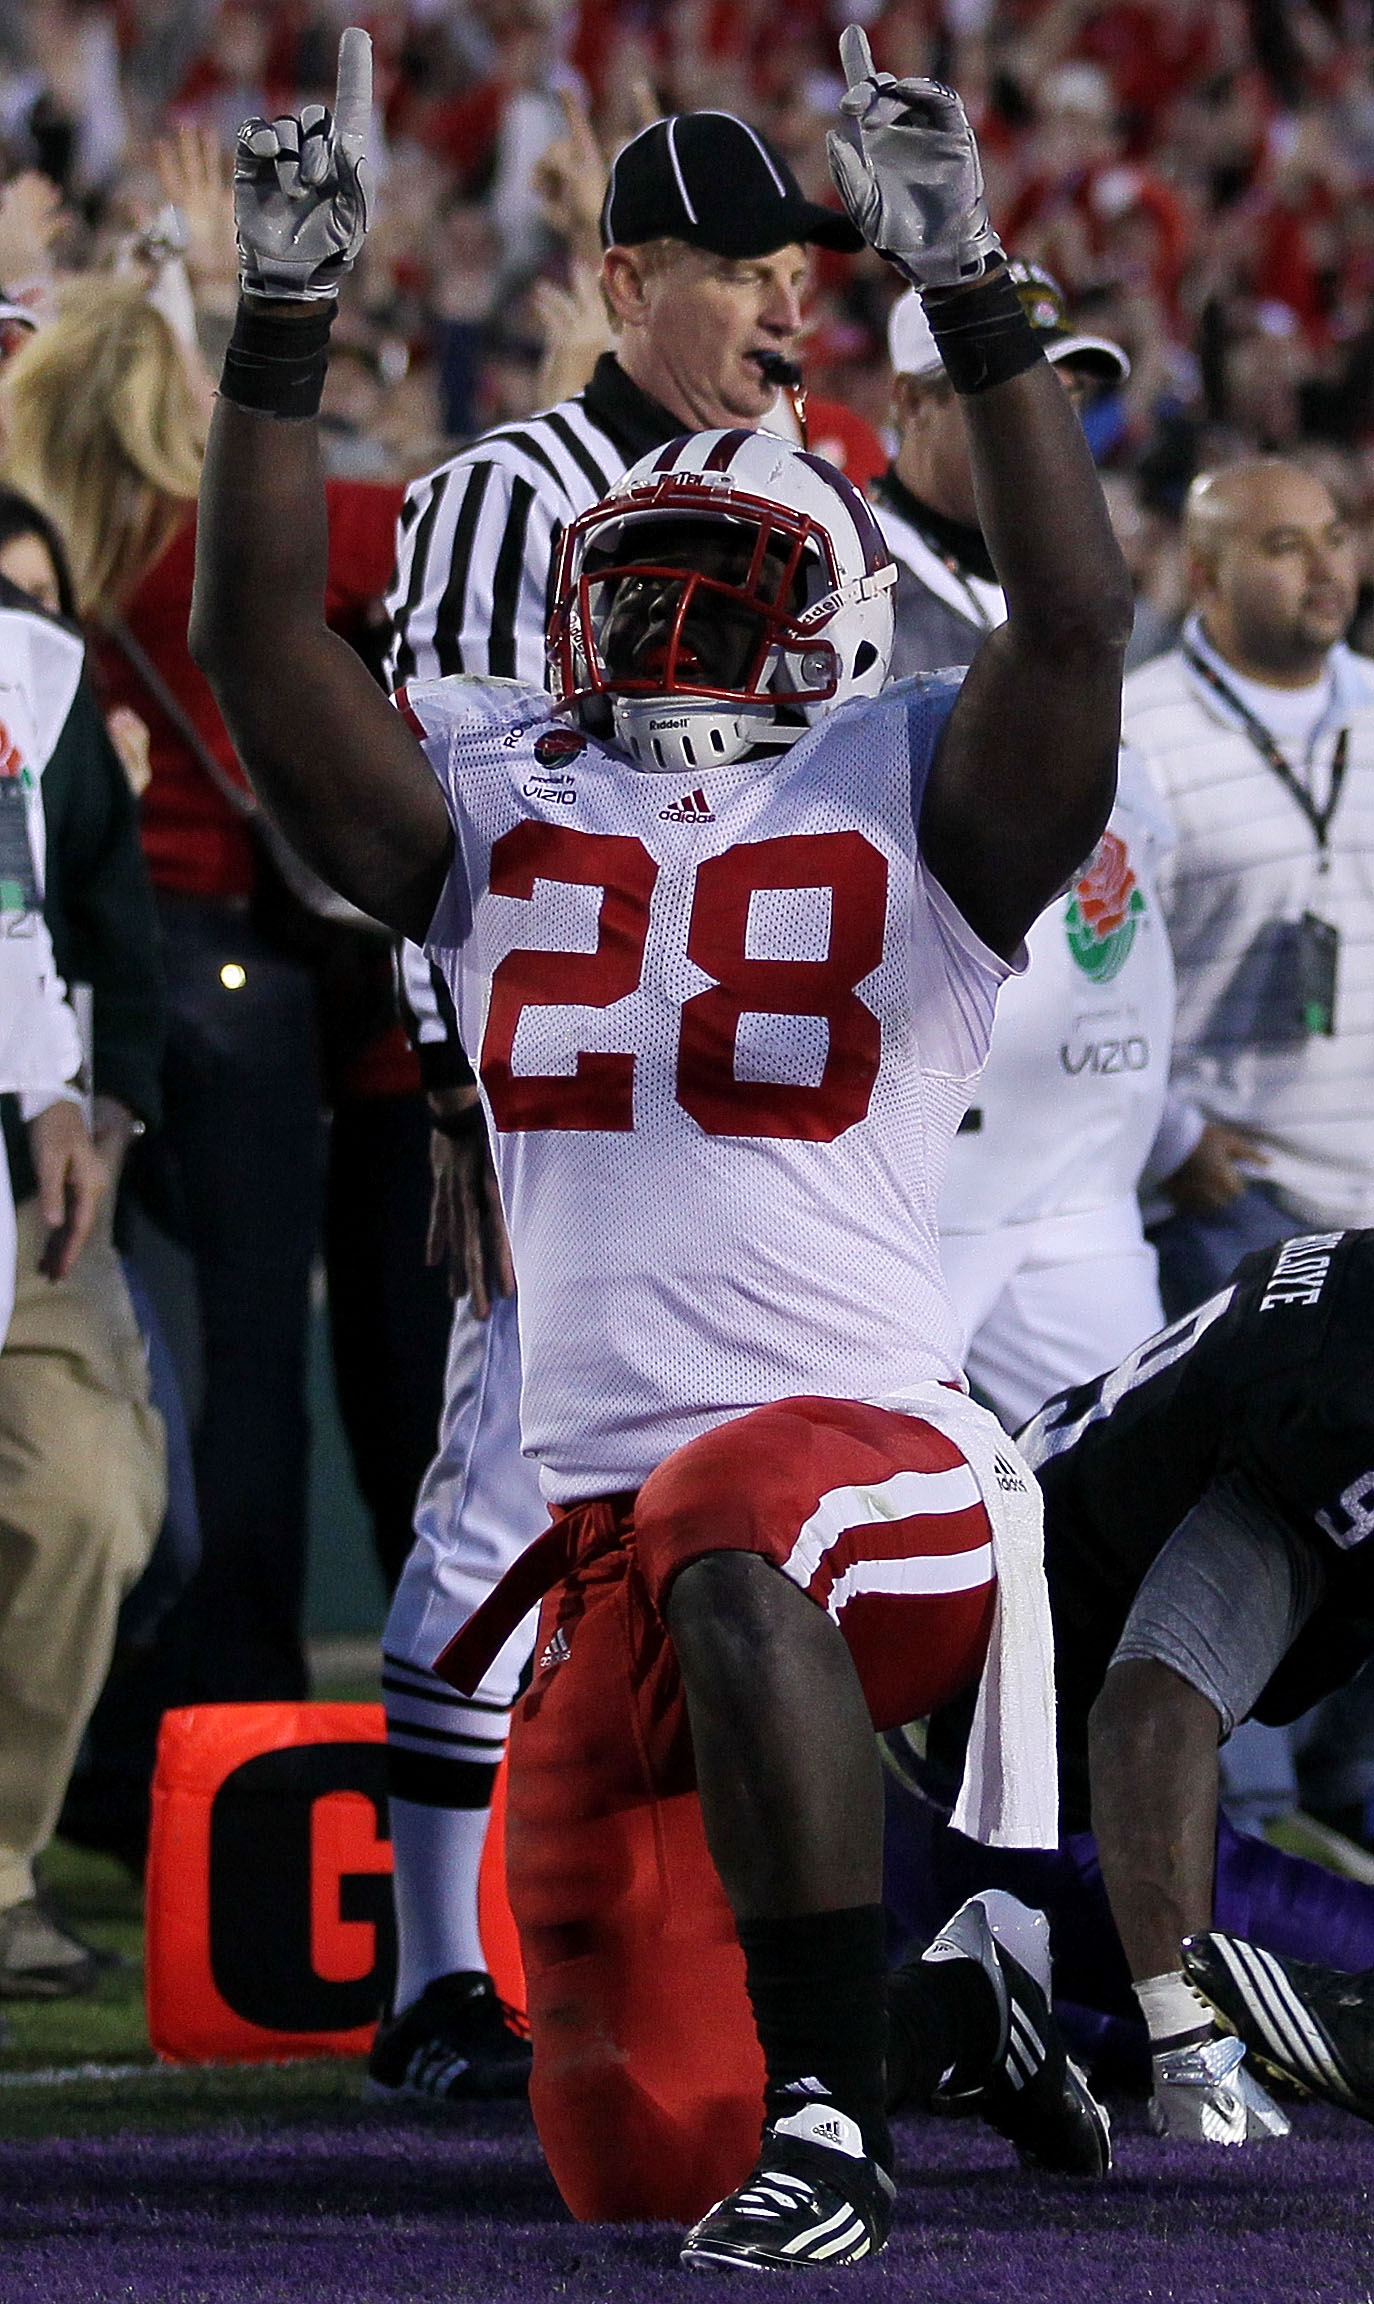 PASADENA, CA - JANUARY 01:  Running back Montee Ball #28 of the Wisconsin Badgers celebrates a touchdown against the TCU Horned Frogs during the 97th Rose Bowl game on January 1, 2011 in Pasadena, California.  (Photo by Stephen Dunn/Getty Images)